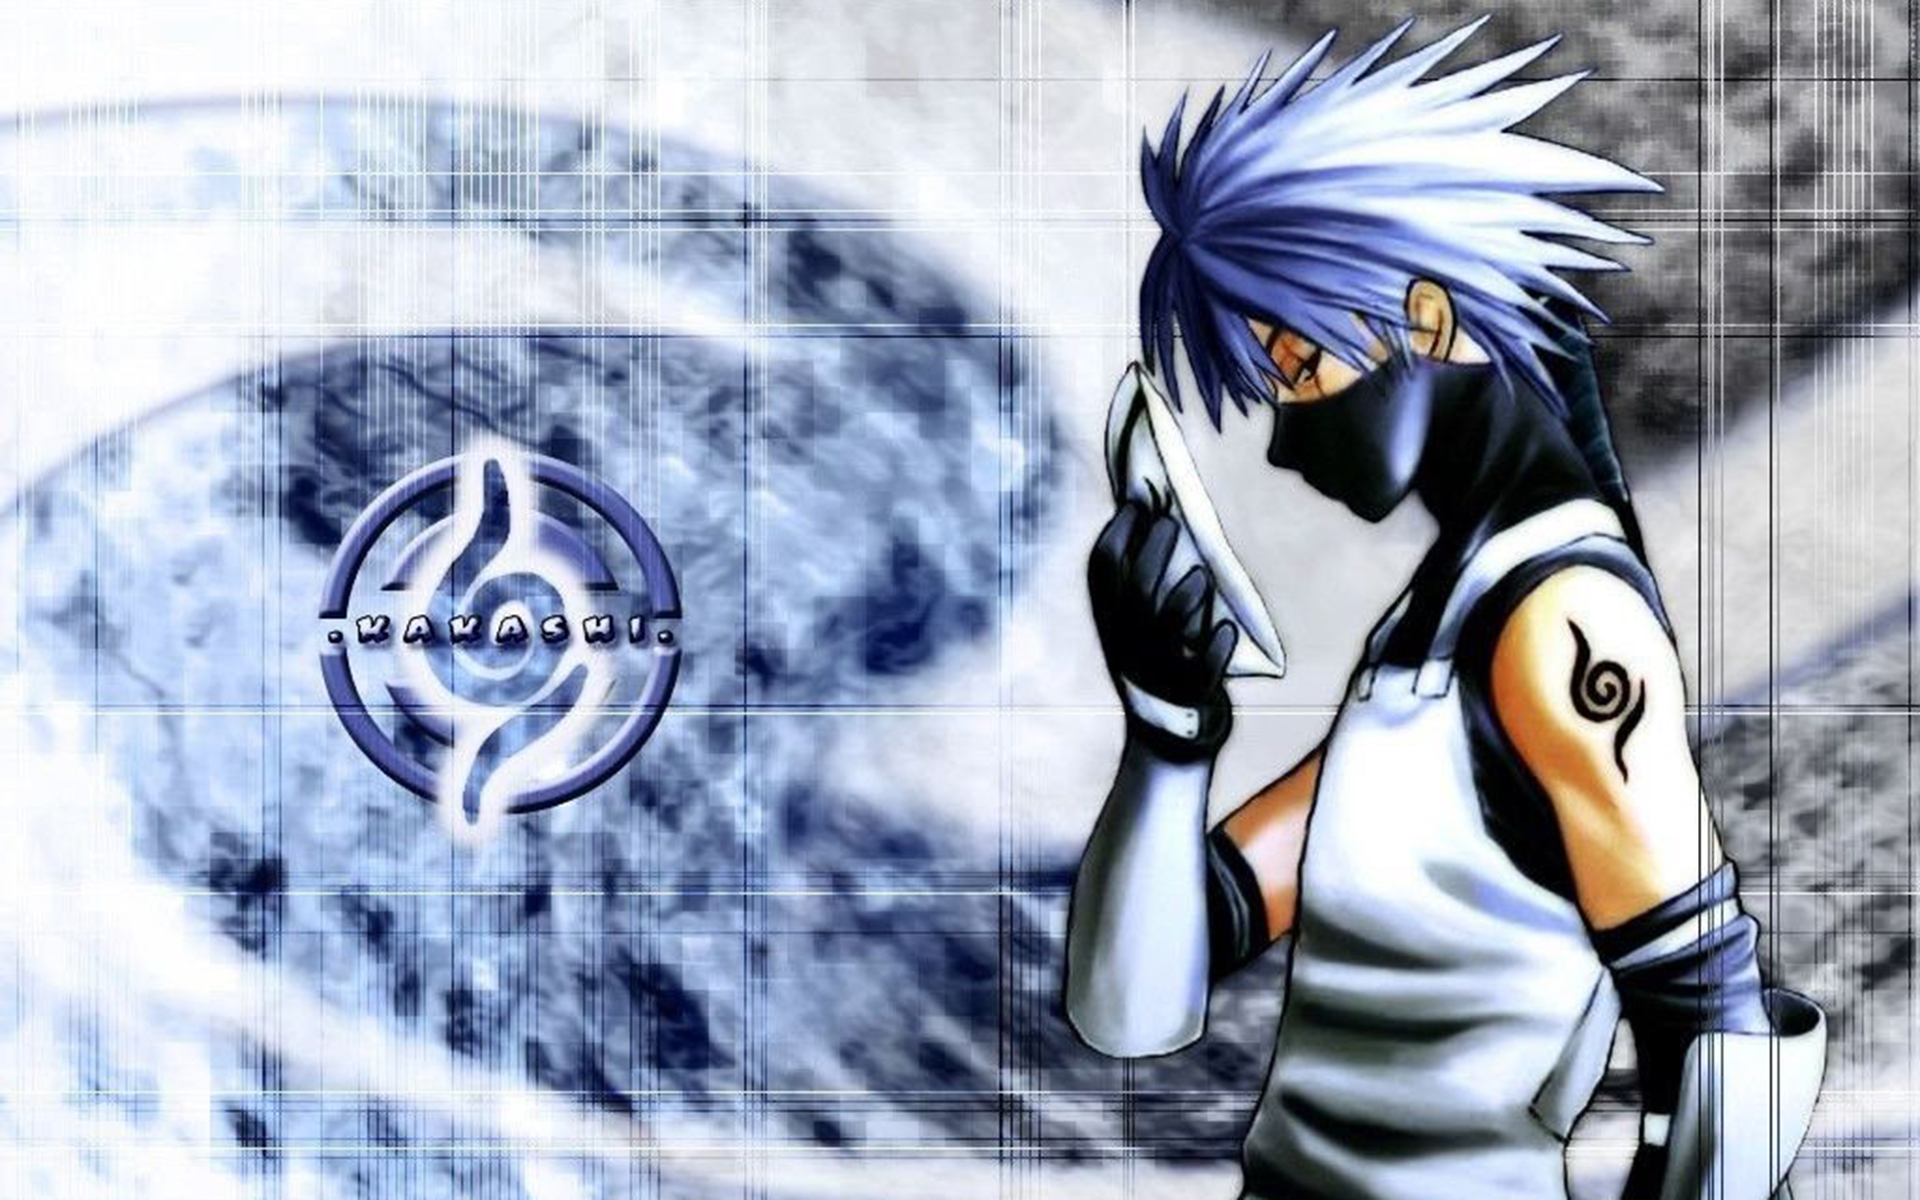 Cool Kakashi Wallpapers for PC Free Download 